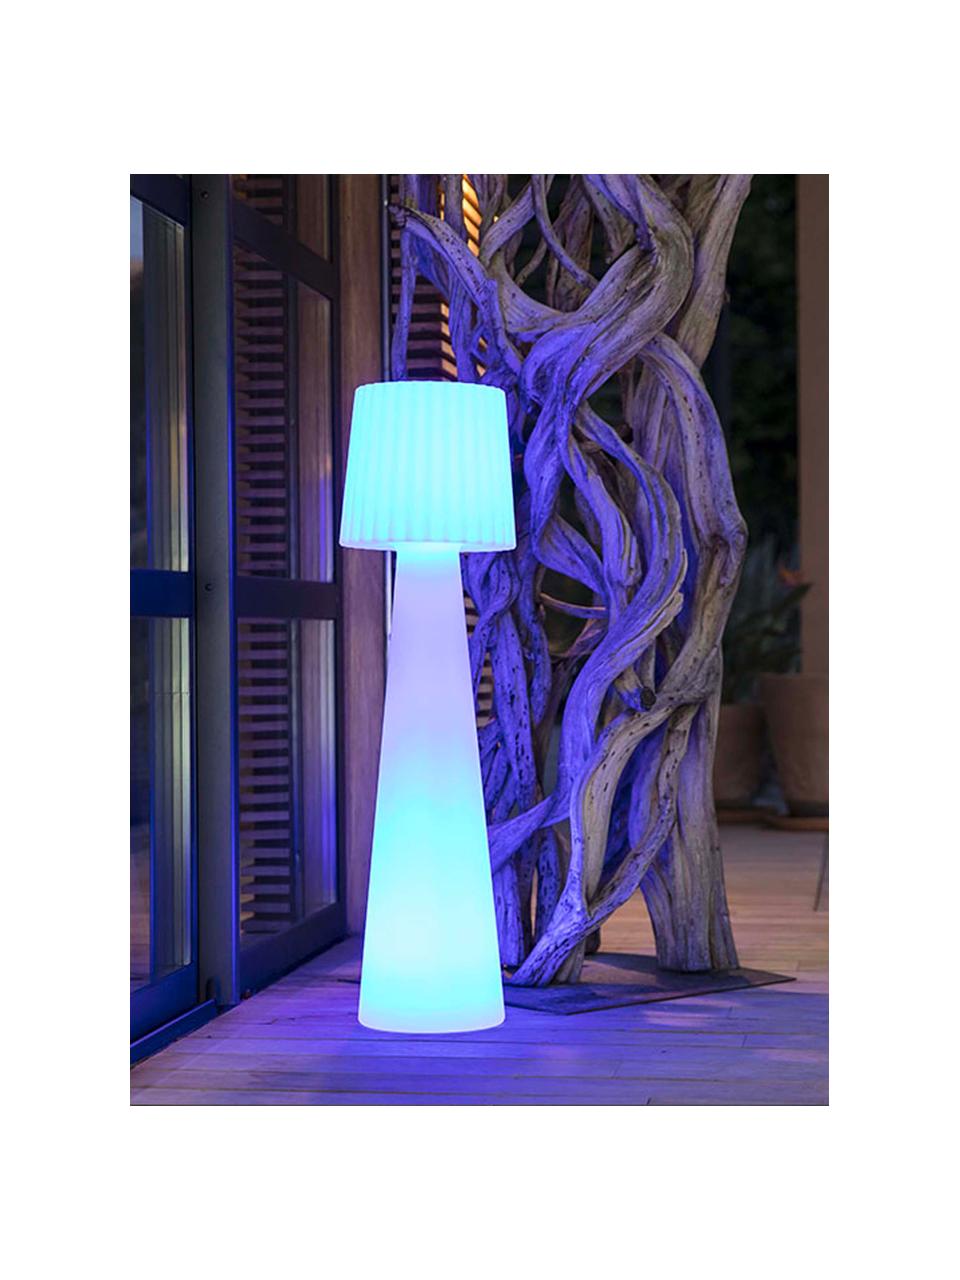 Mobile Outdoor LED-Stehlampe Lady mit Farbwechsel, dimmbar, Kunststoff, Weiß, H 110 cm